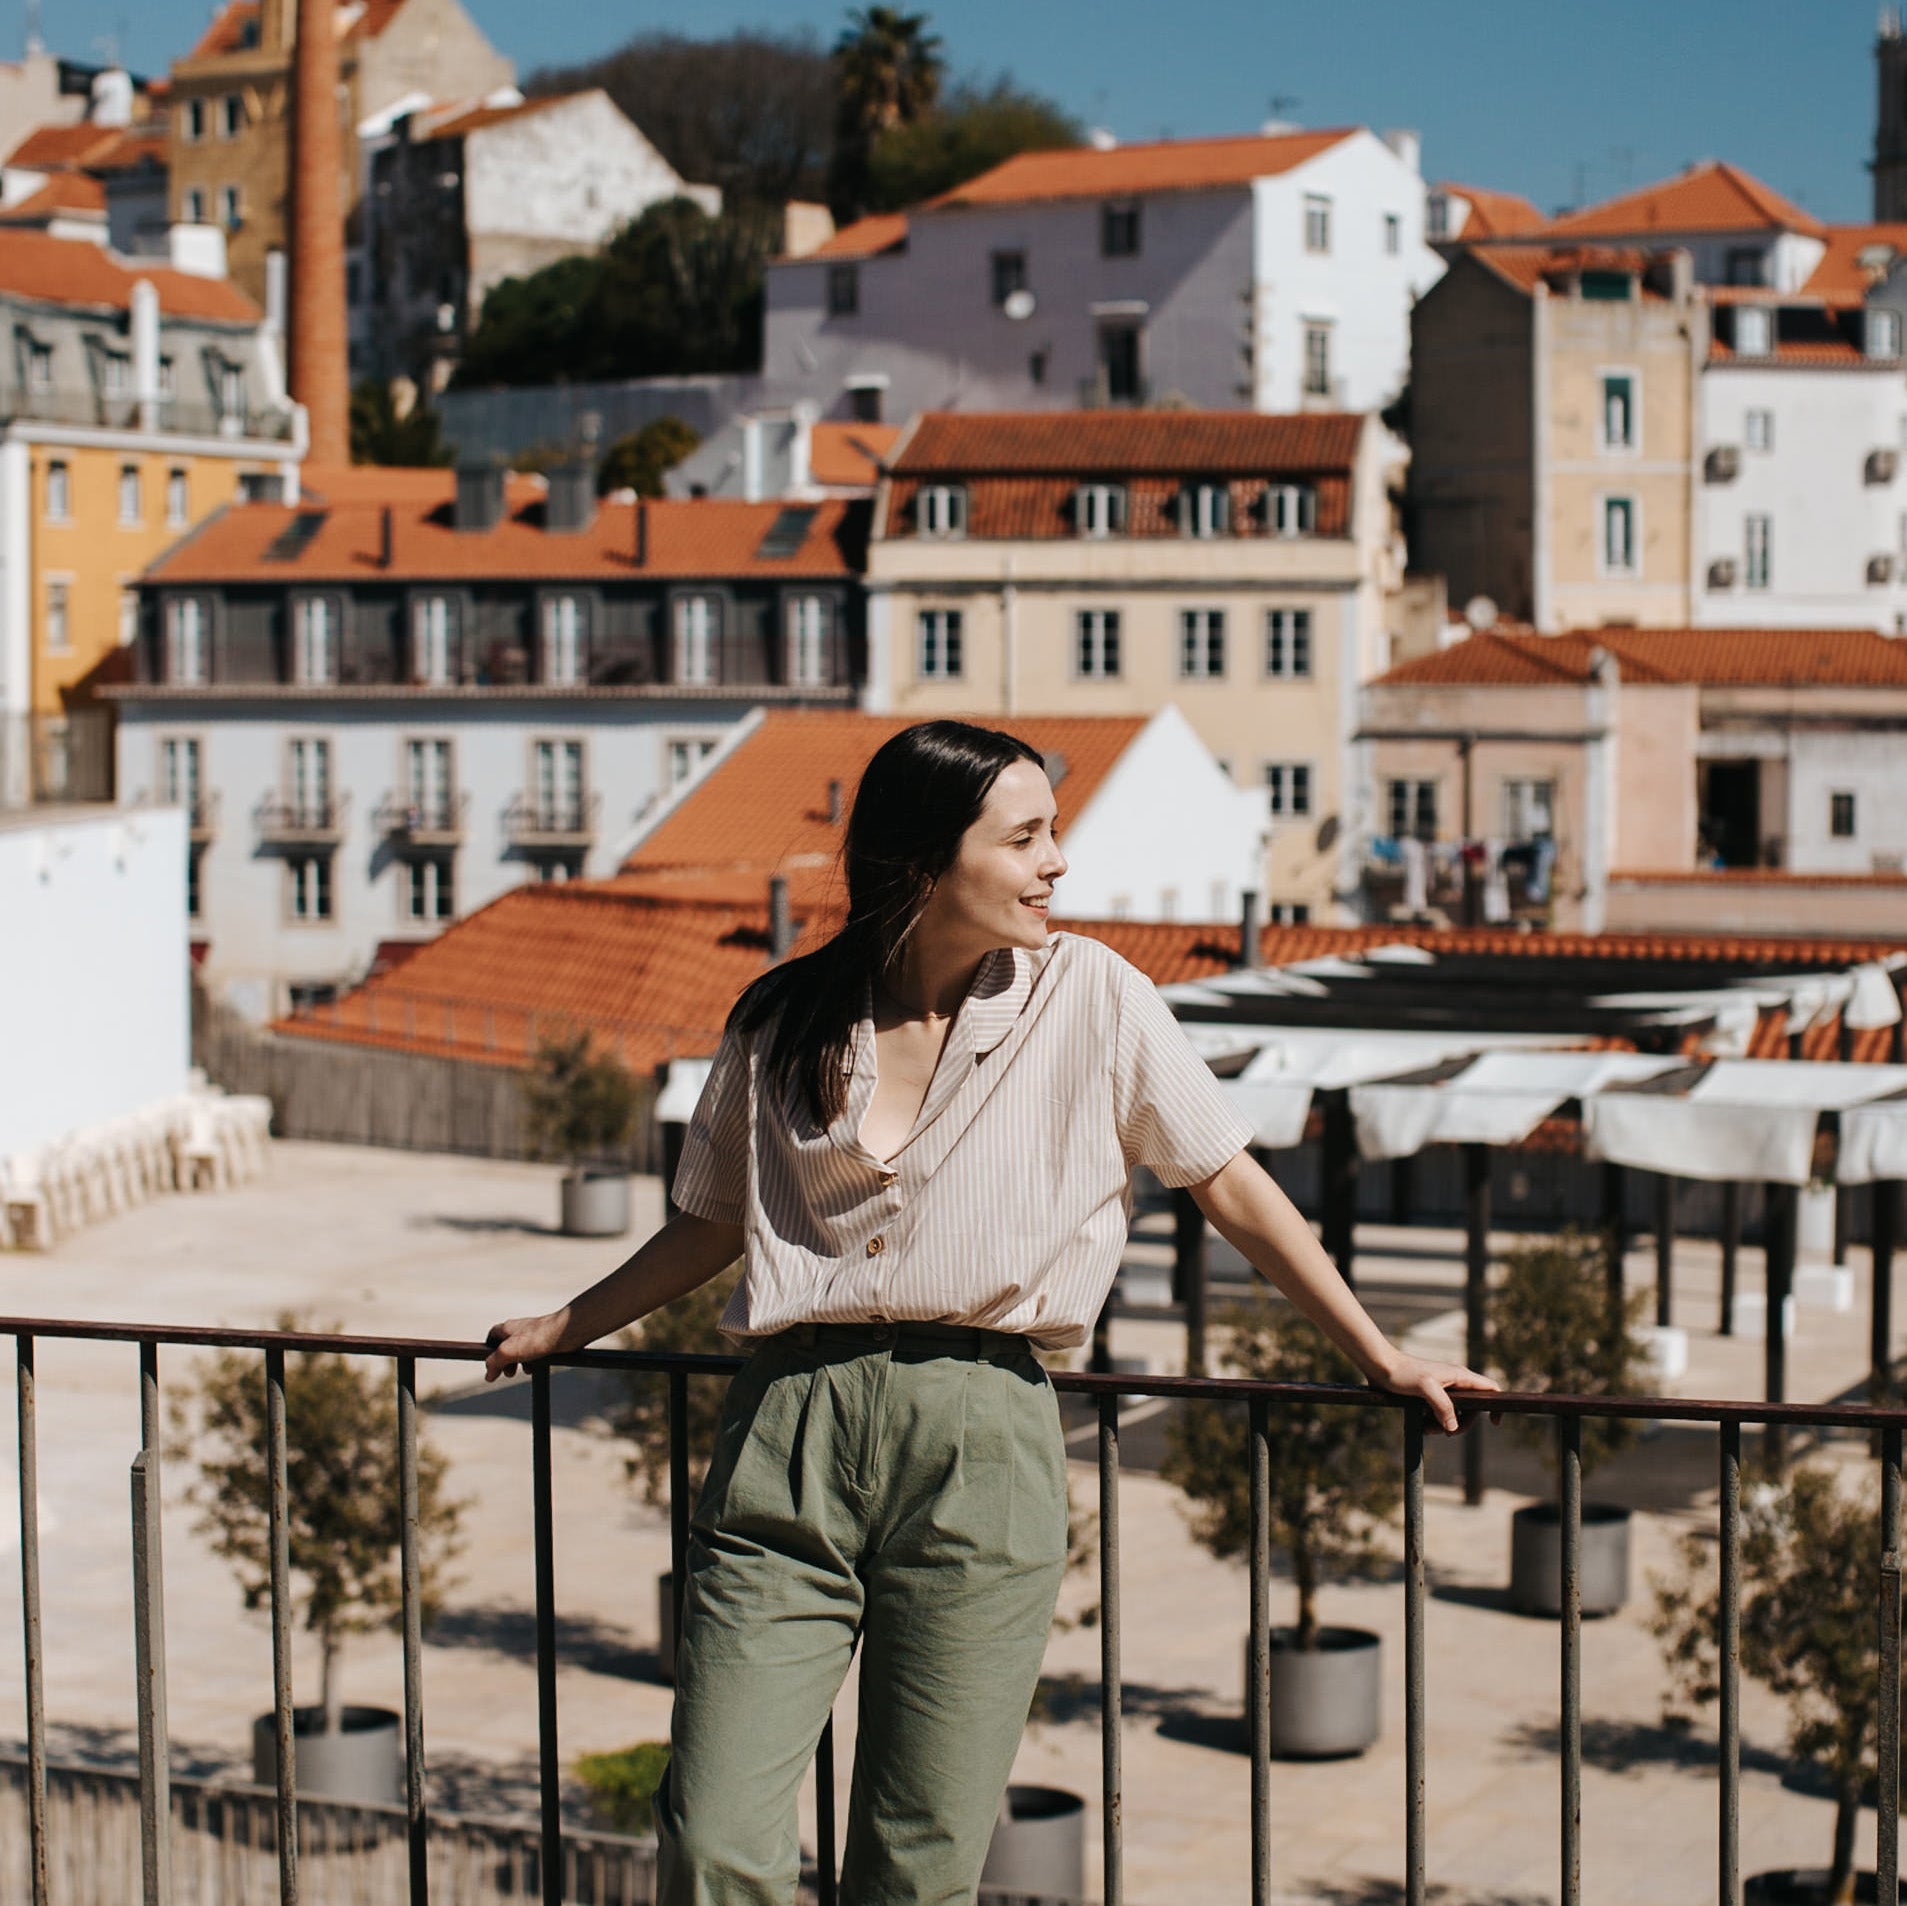 5 sustainable spots to visit in Lisbon this summer and have a positive impact